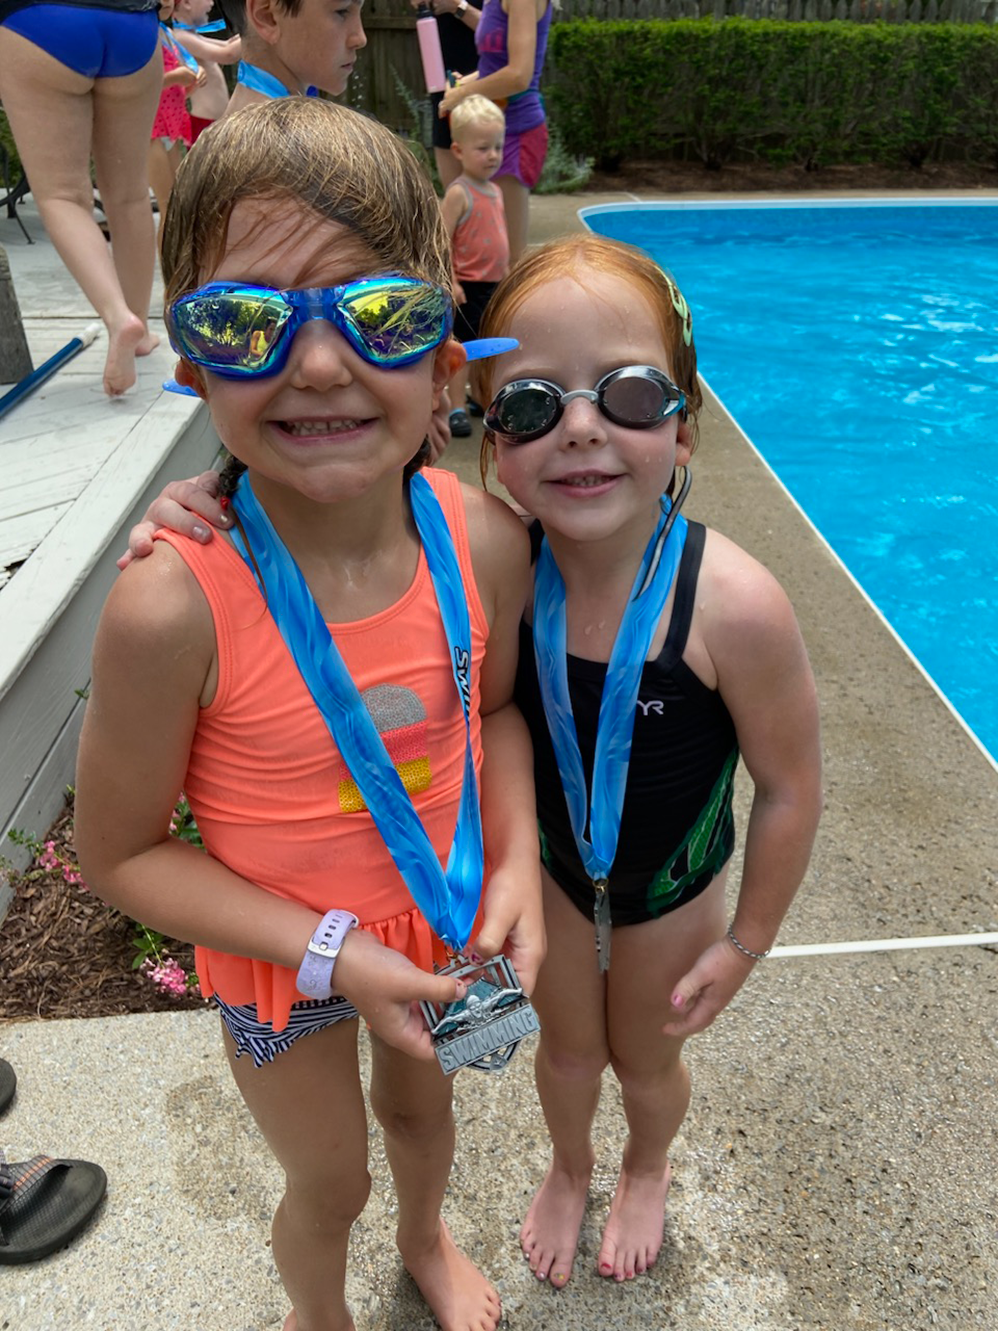 Two young girls wearing swim goggles stand poolside displaying their medals received upon completing their swim instruction.